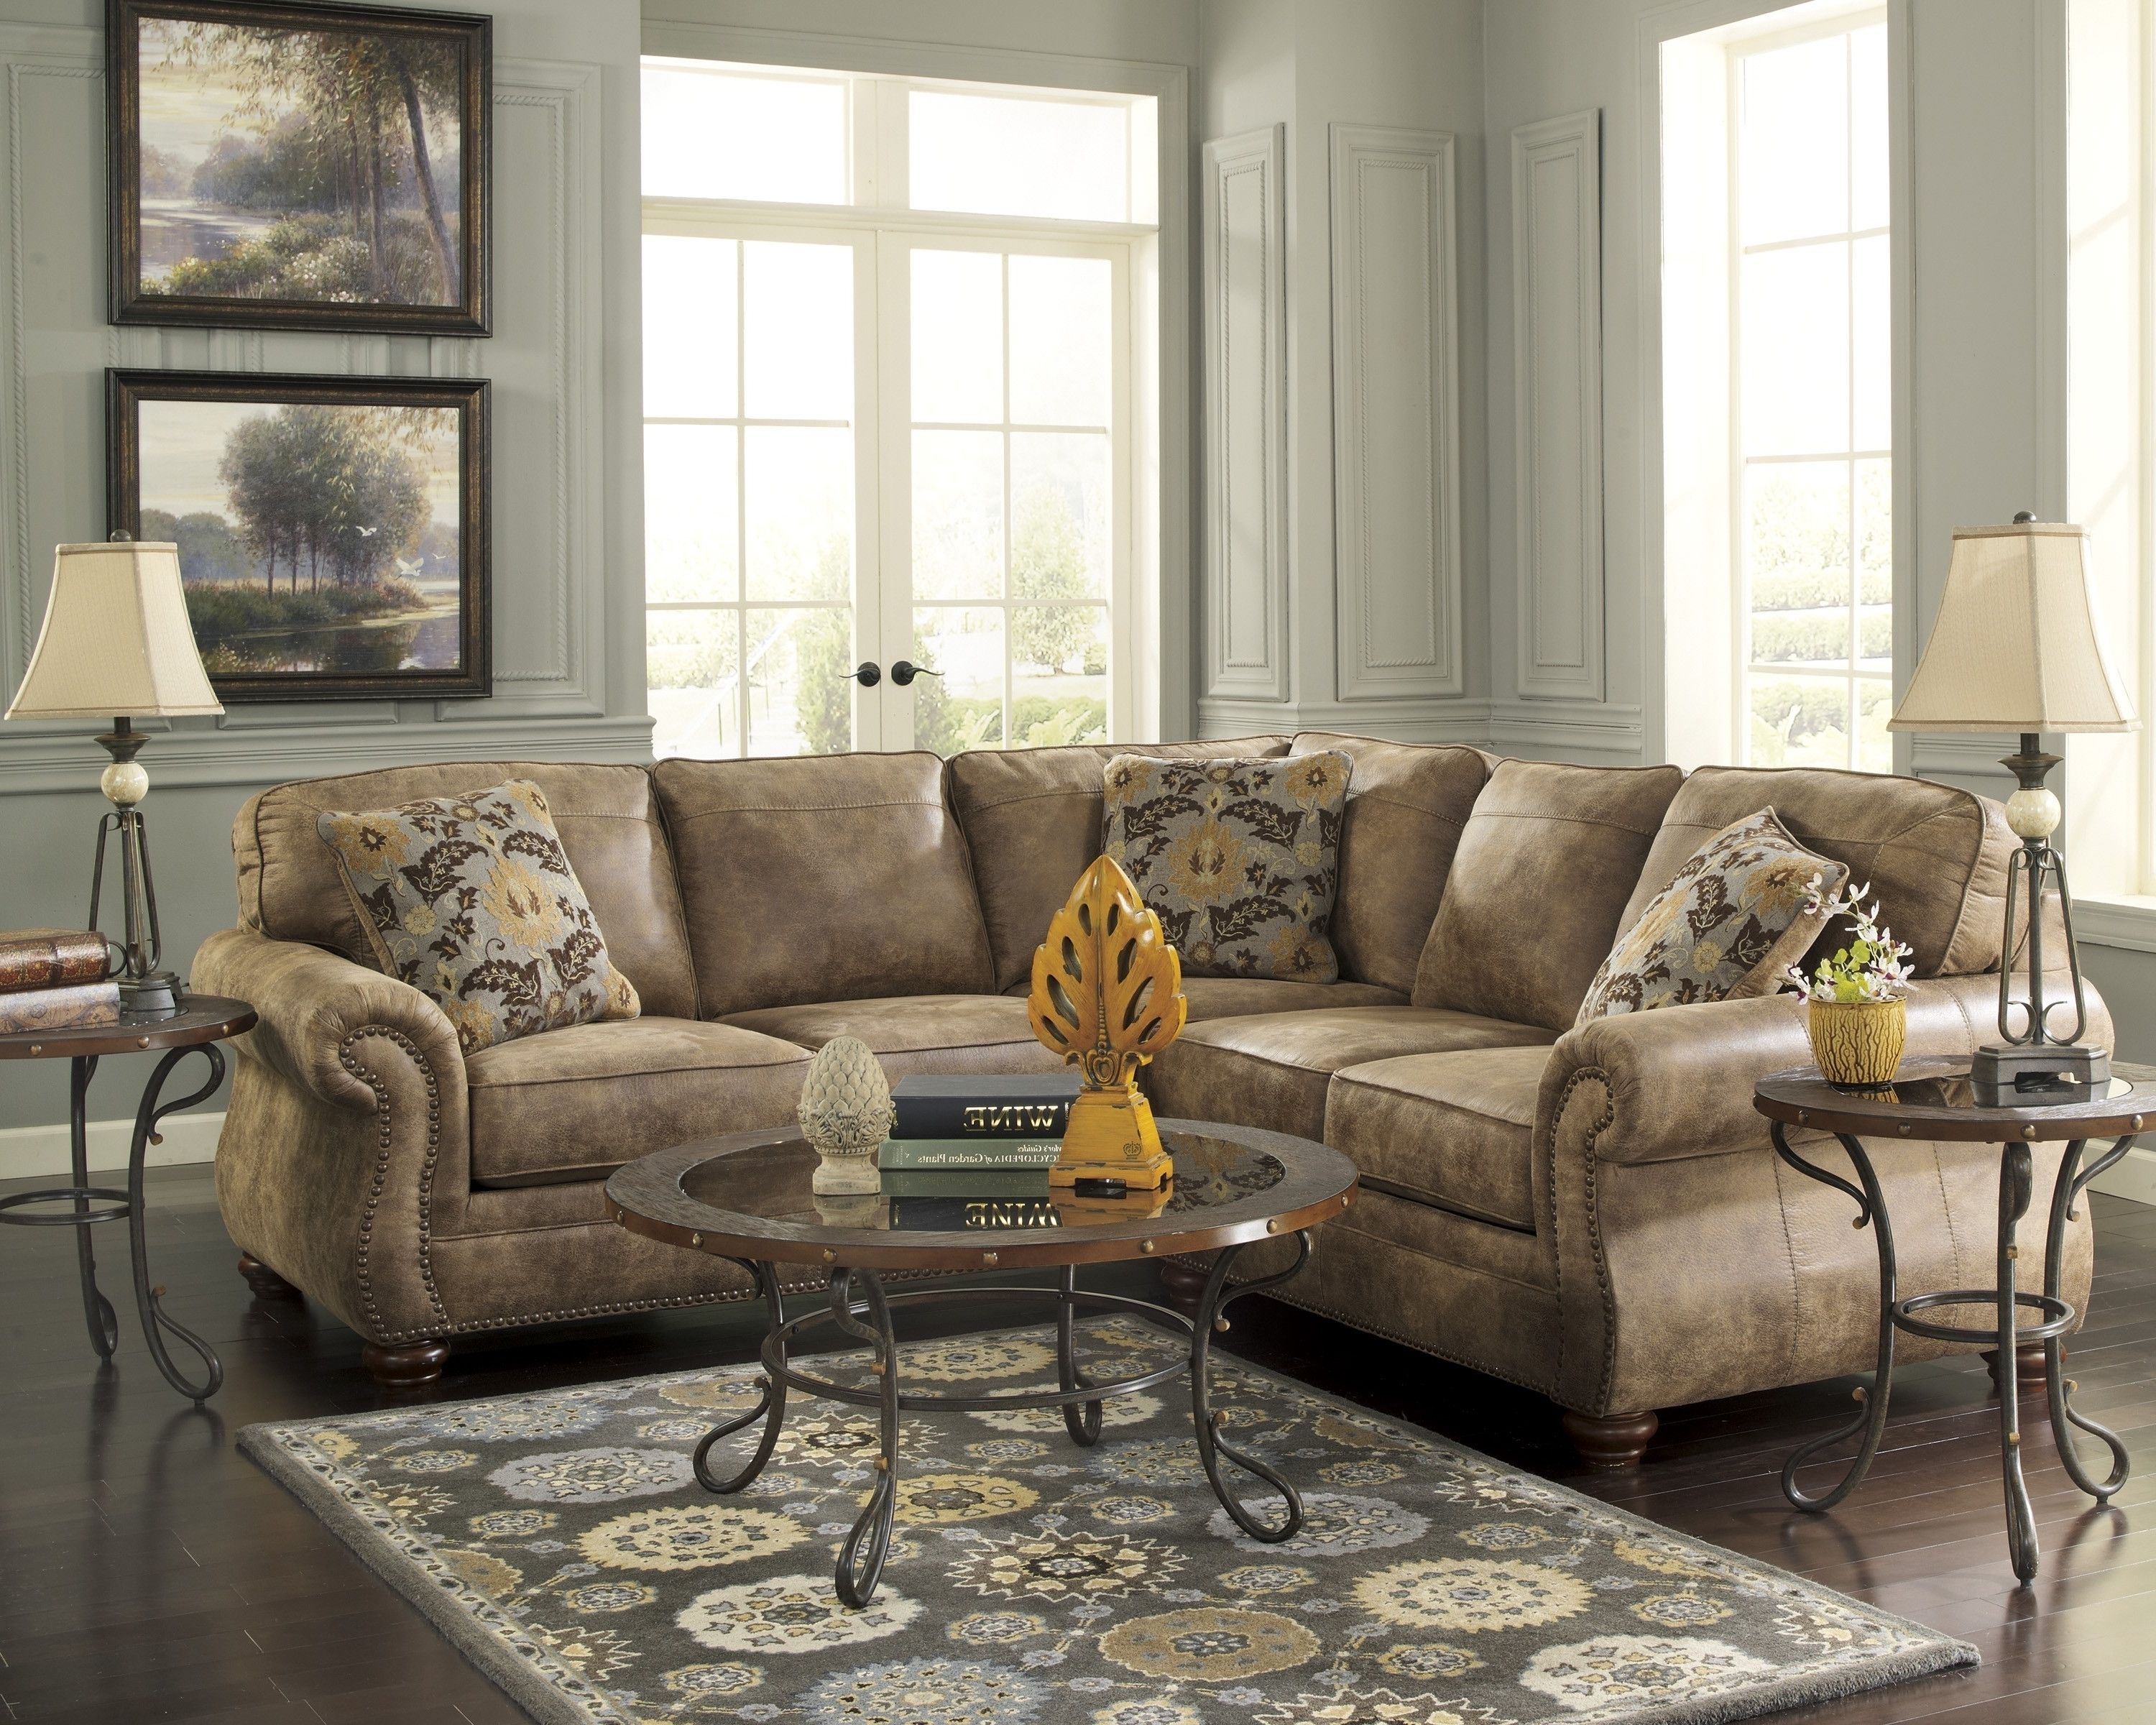 Stunning Sectional Sofas Tucson 90 For Your Olive Green Sectional Pertaining To Tucson Sectional Sofas (Photo 7 of 10)